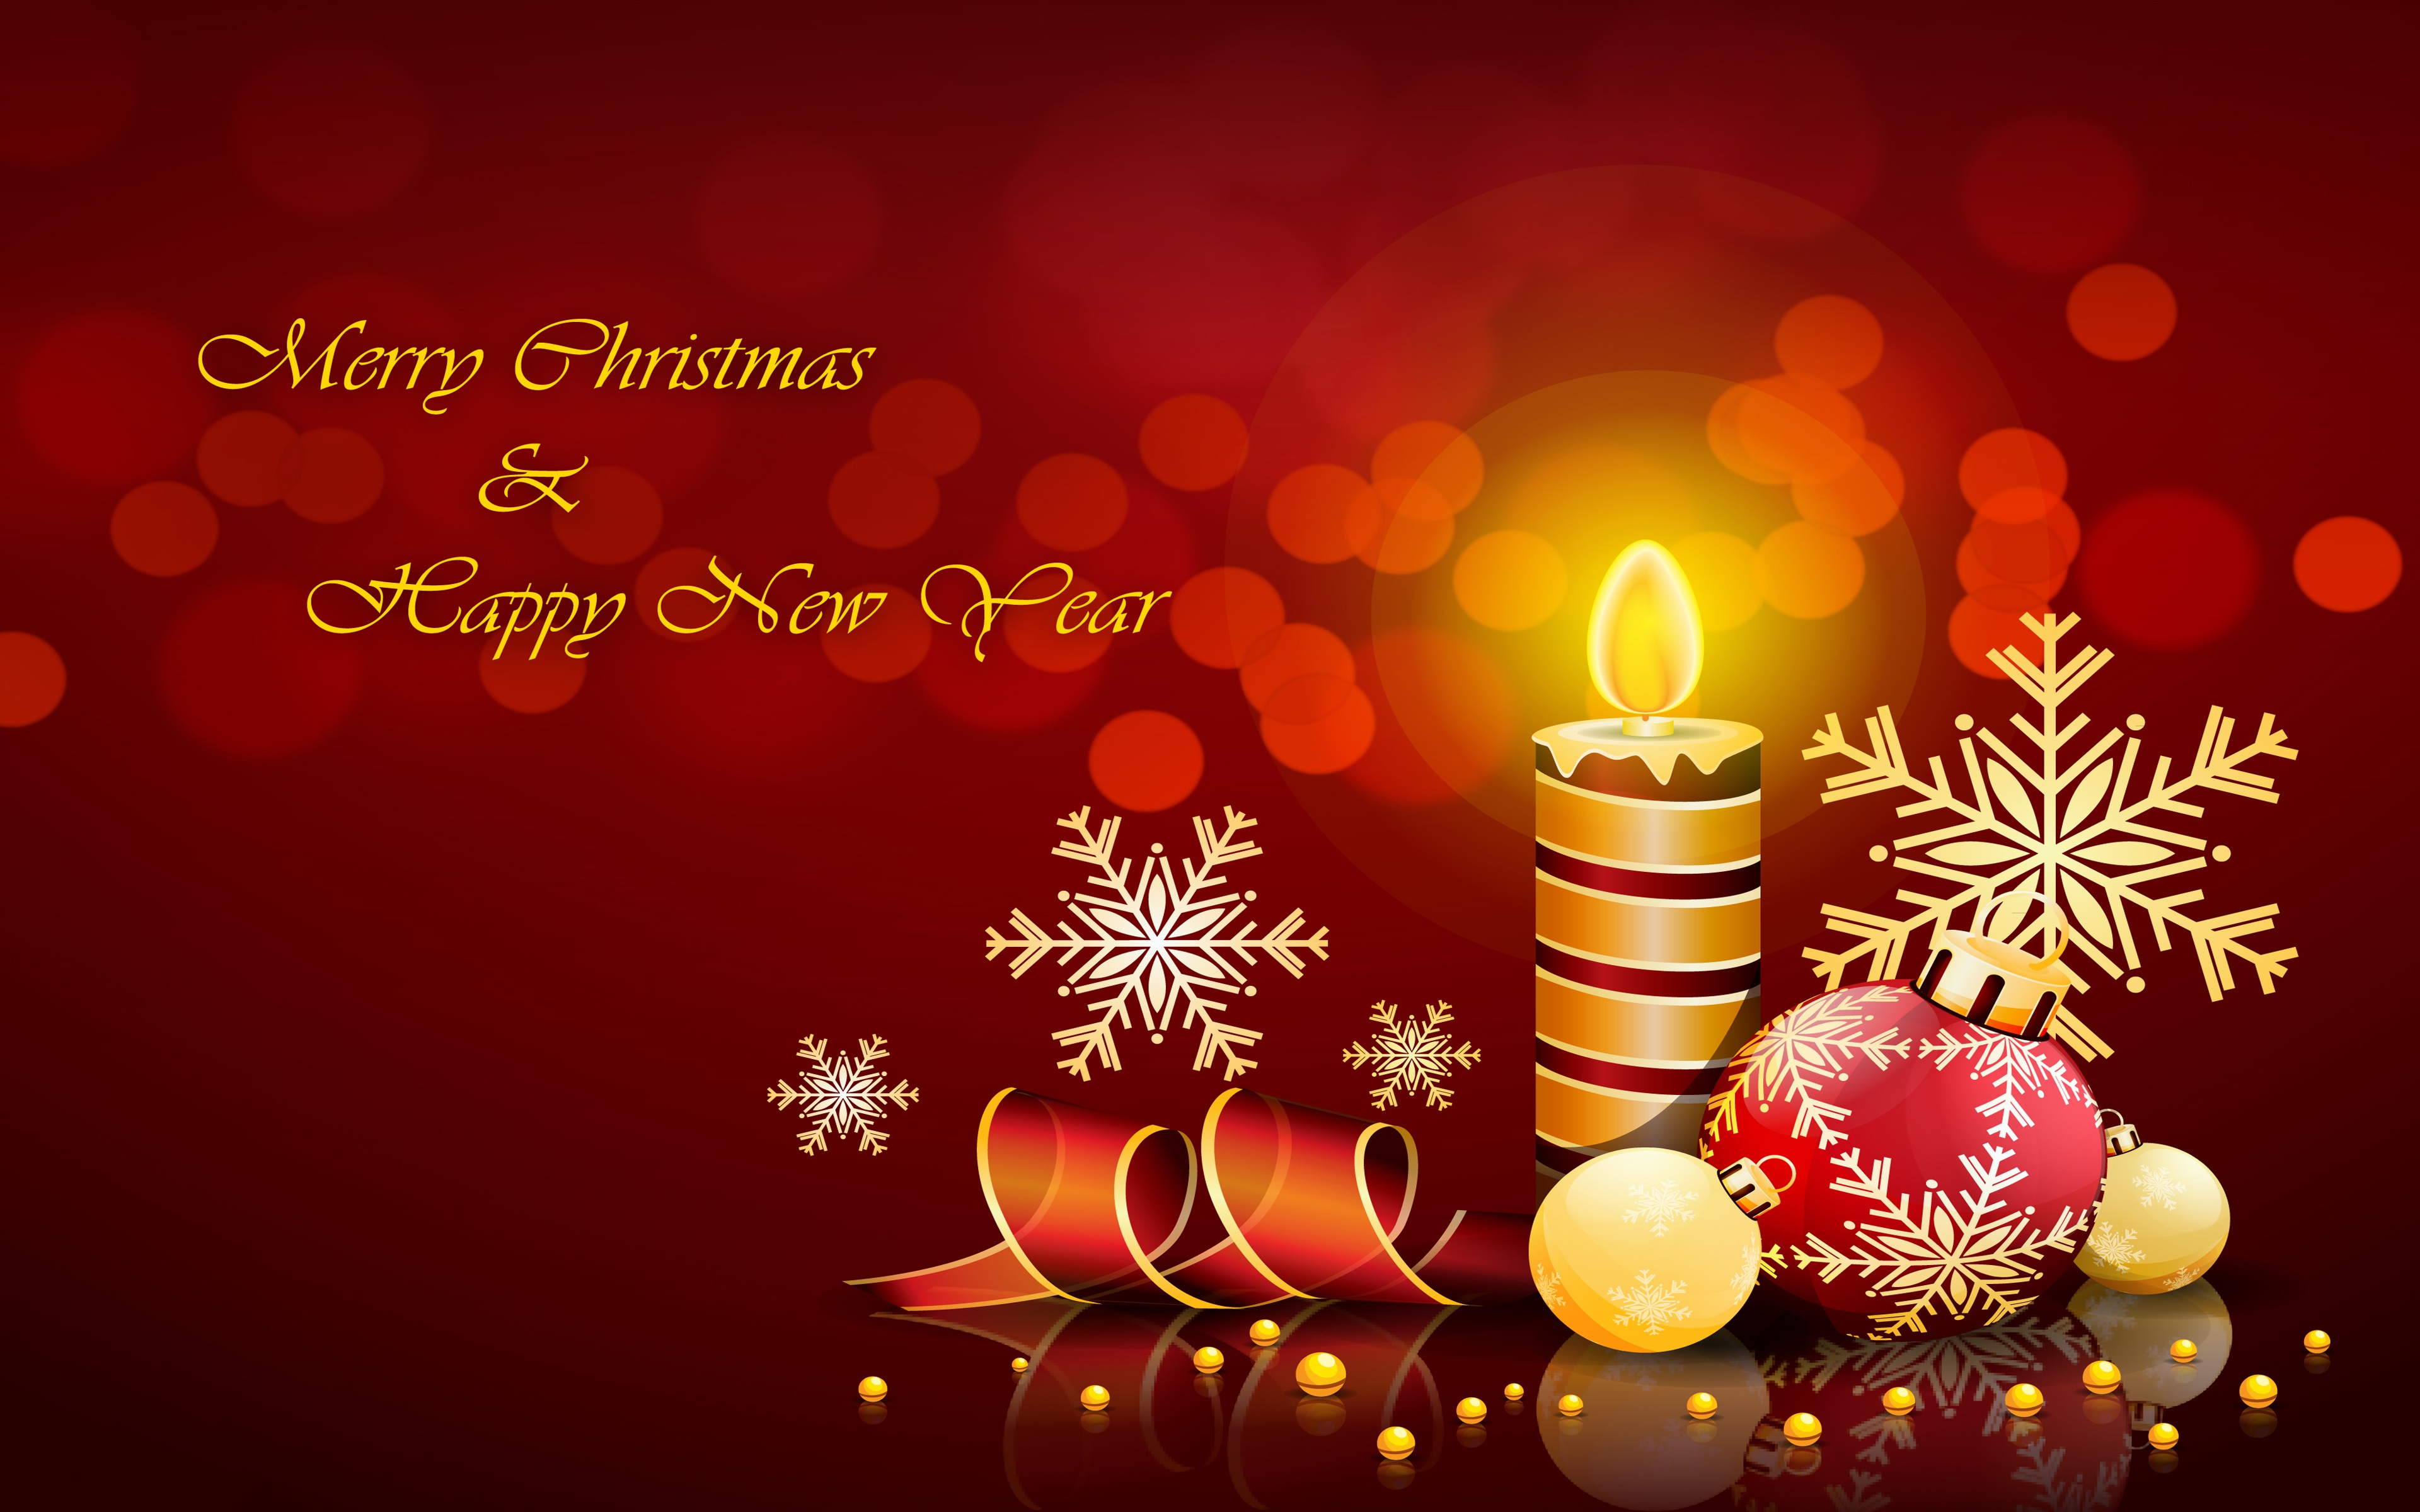 Merry Christmas And Happy New Year Decorative Candle Decorations Greeting Card 3840x2400 ...